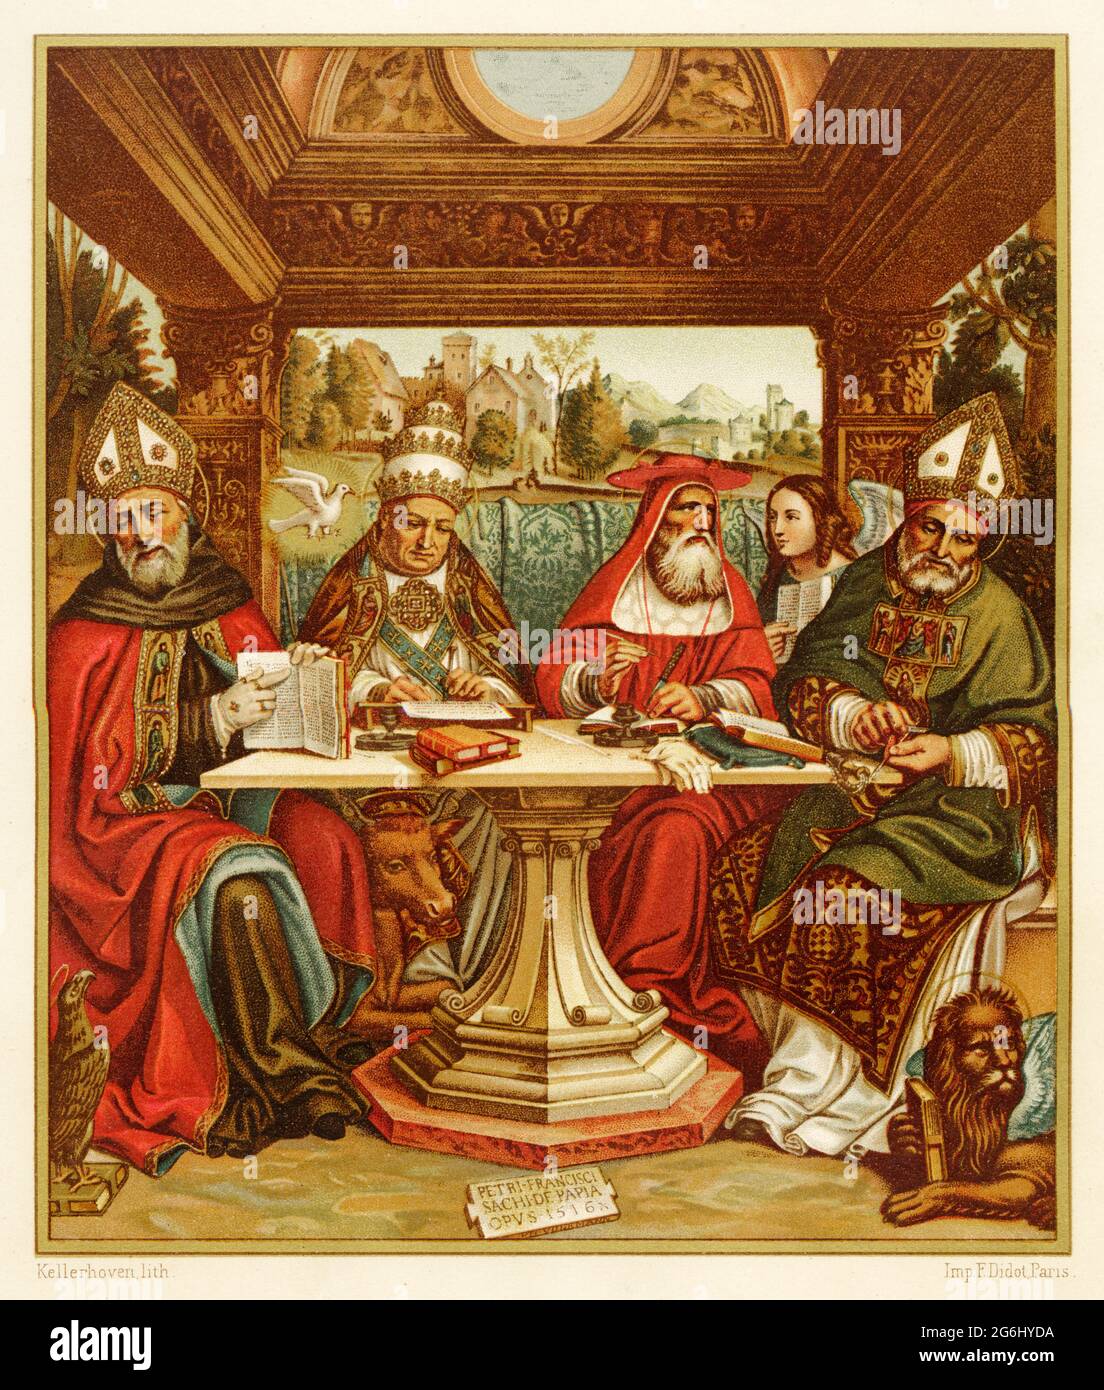 The Four Doctors of the Latin Church, painting by Sacchi di Pavia 16th century. Saint Augustine Bishop of Hipona, Pope Gregory the Great, the angel next to Saint Jerome, the lion with wings next to Saint Augustine. Old 19th century Color lithography illustration from Jesus Christ by Veuillot 1881 Stock Photo